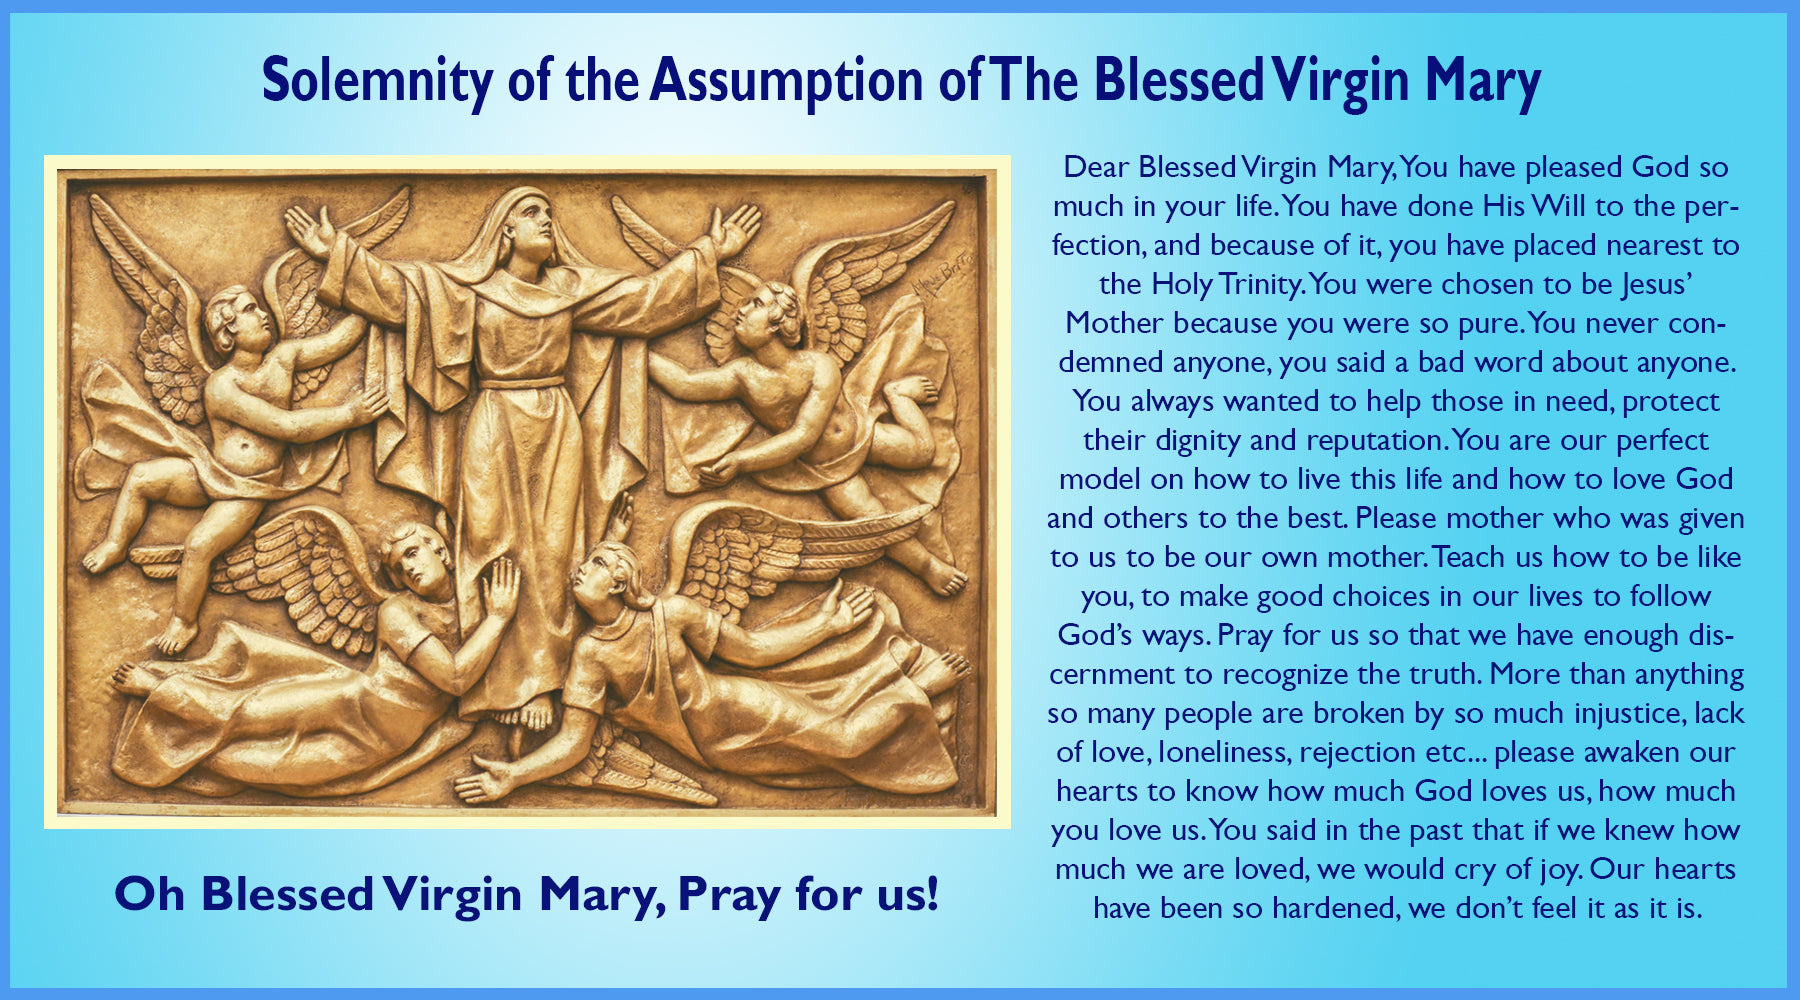 Solemnity of the Assumption of The Blessed Virgin Mary